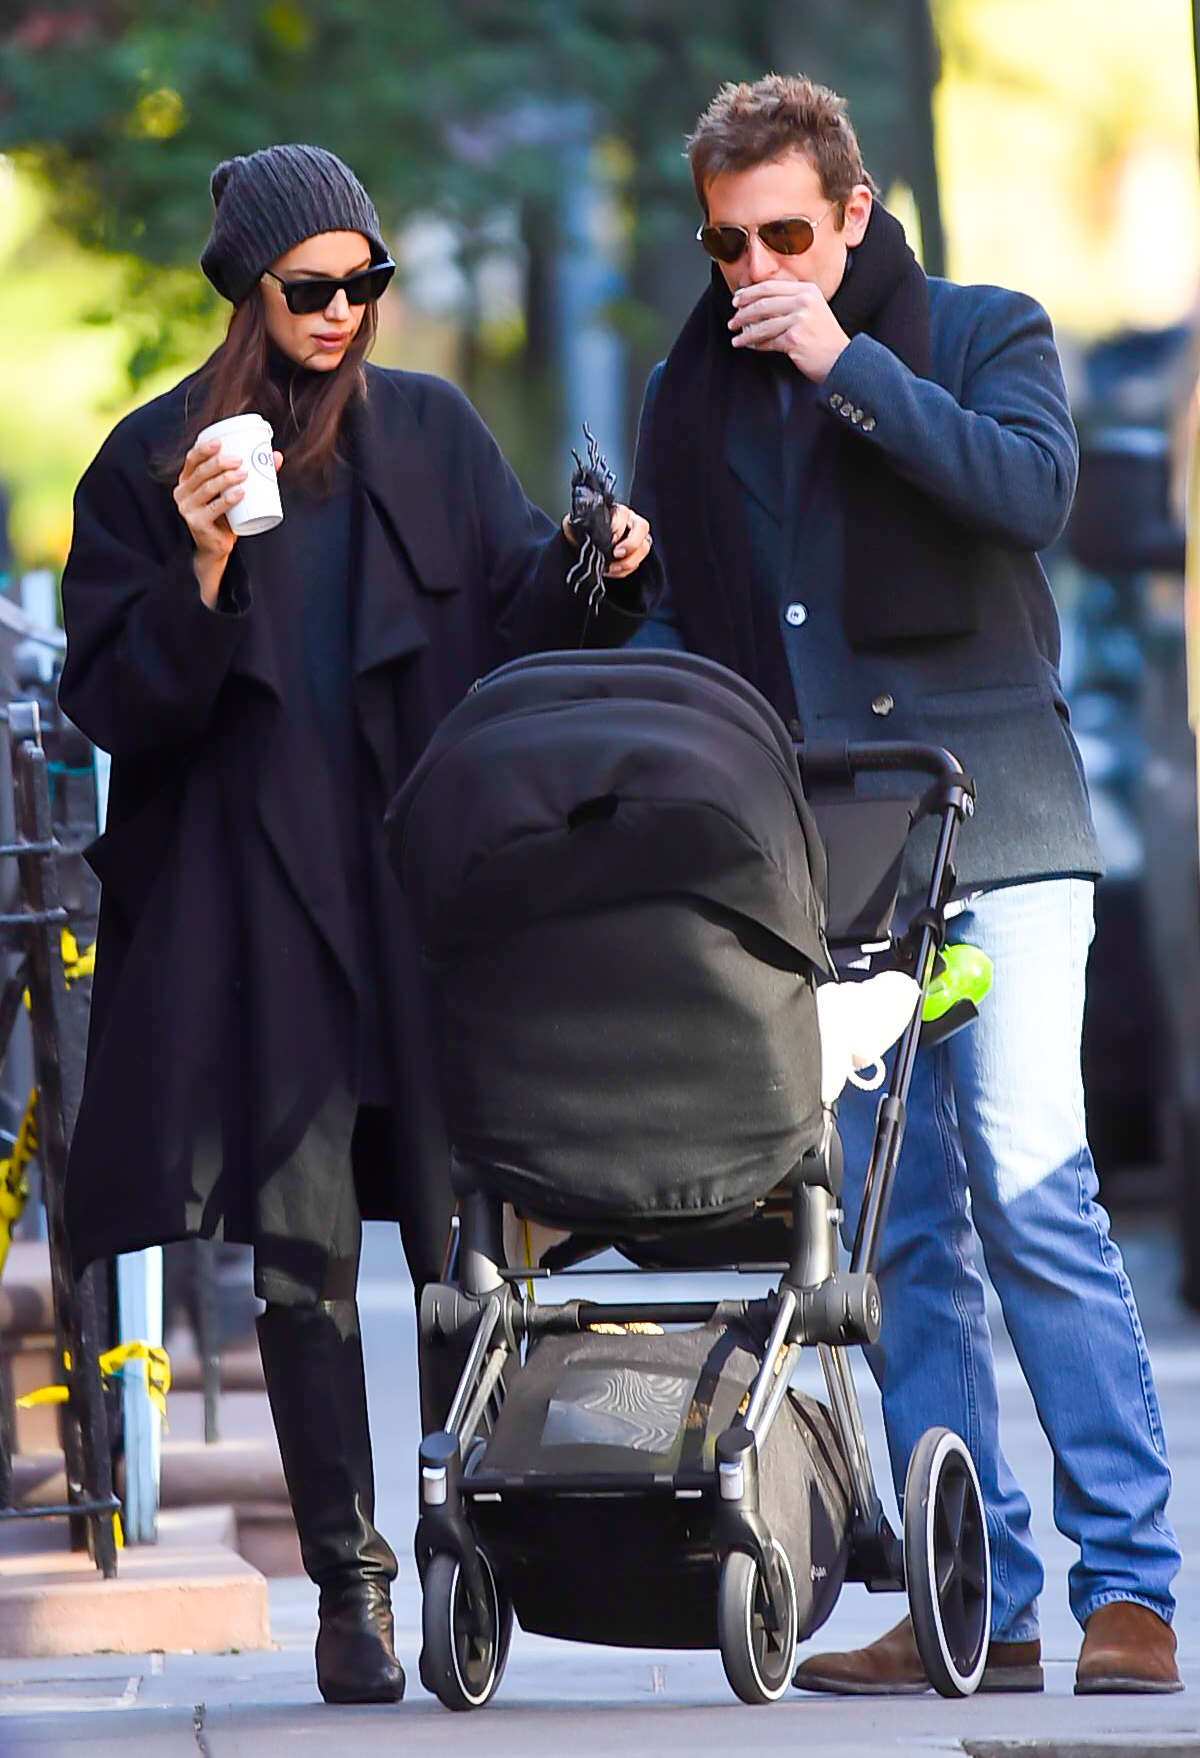 Bradley Cooper and Irina Shayk on October 24, 2018 in New York City. | Source: Getty Images